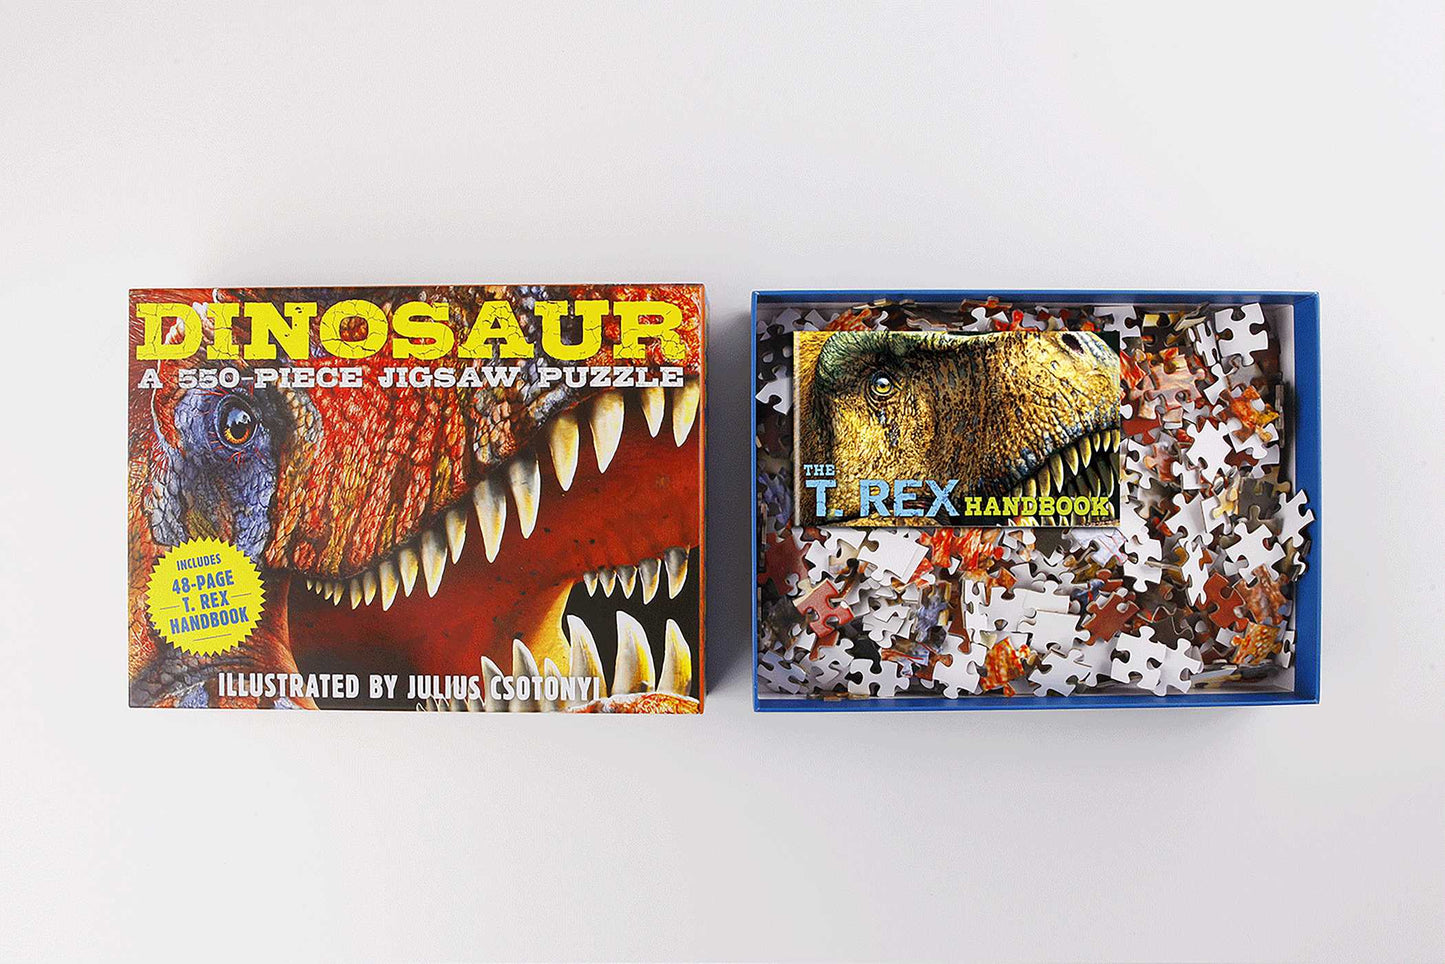 Dinosaurs: 550-Piece Jigsaw Puzzle & Book: A 550-Piece Family Jigsaw Puzzle Featuring the T-Rex Handbook!